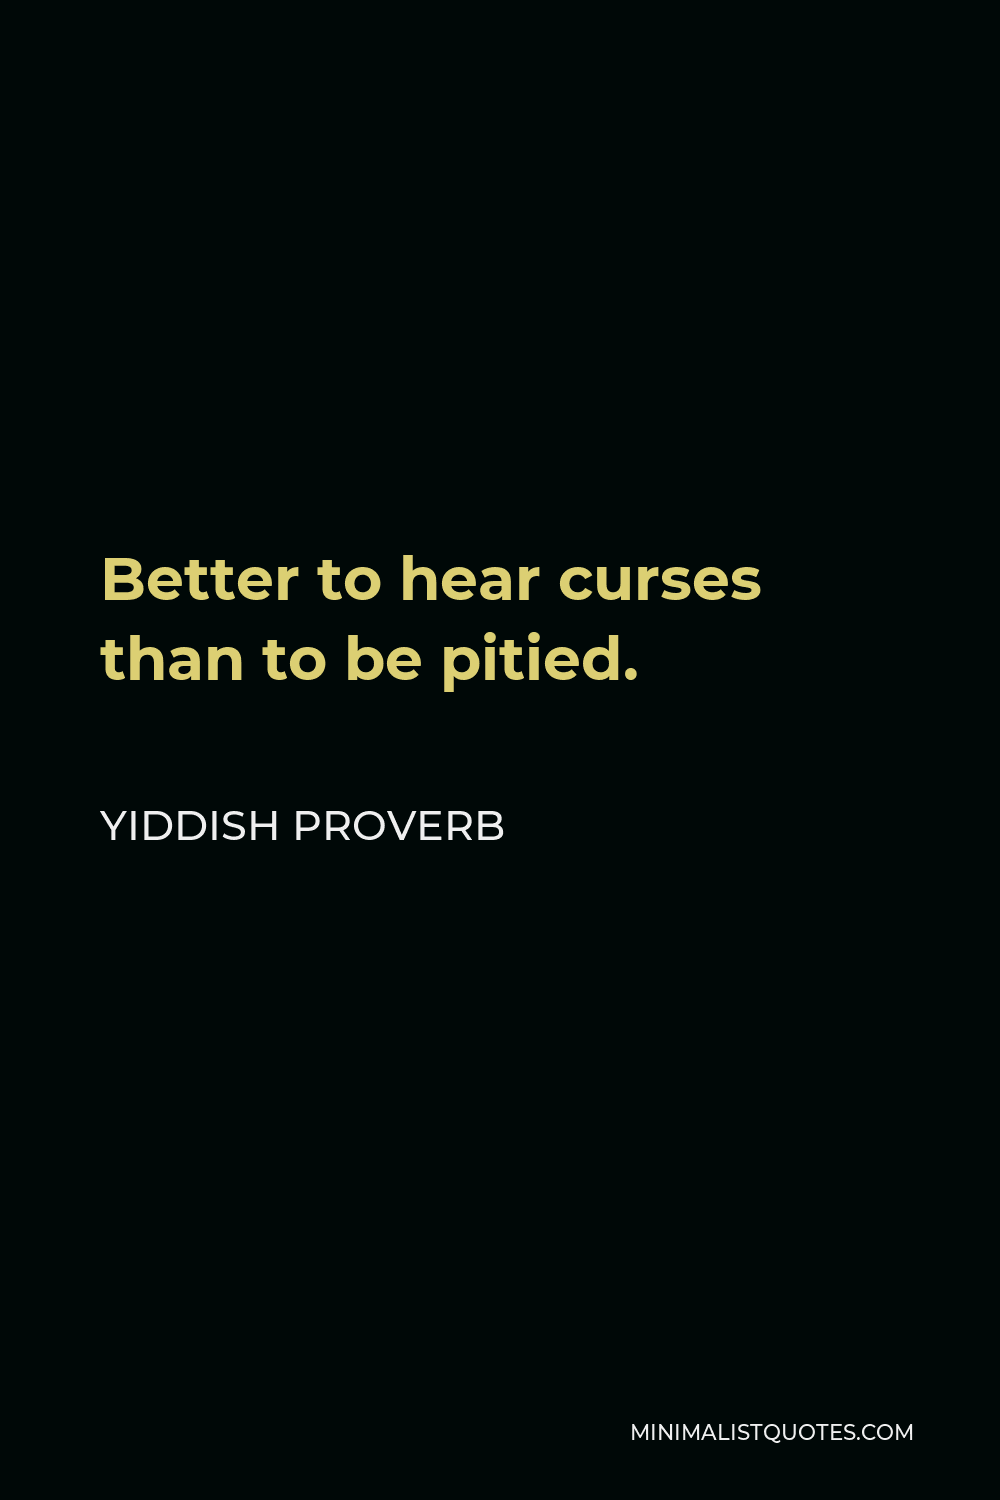 Yiddish Proverb Quote - Better to hear curses than to be pitied.